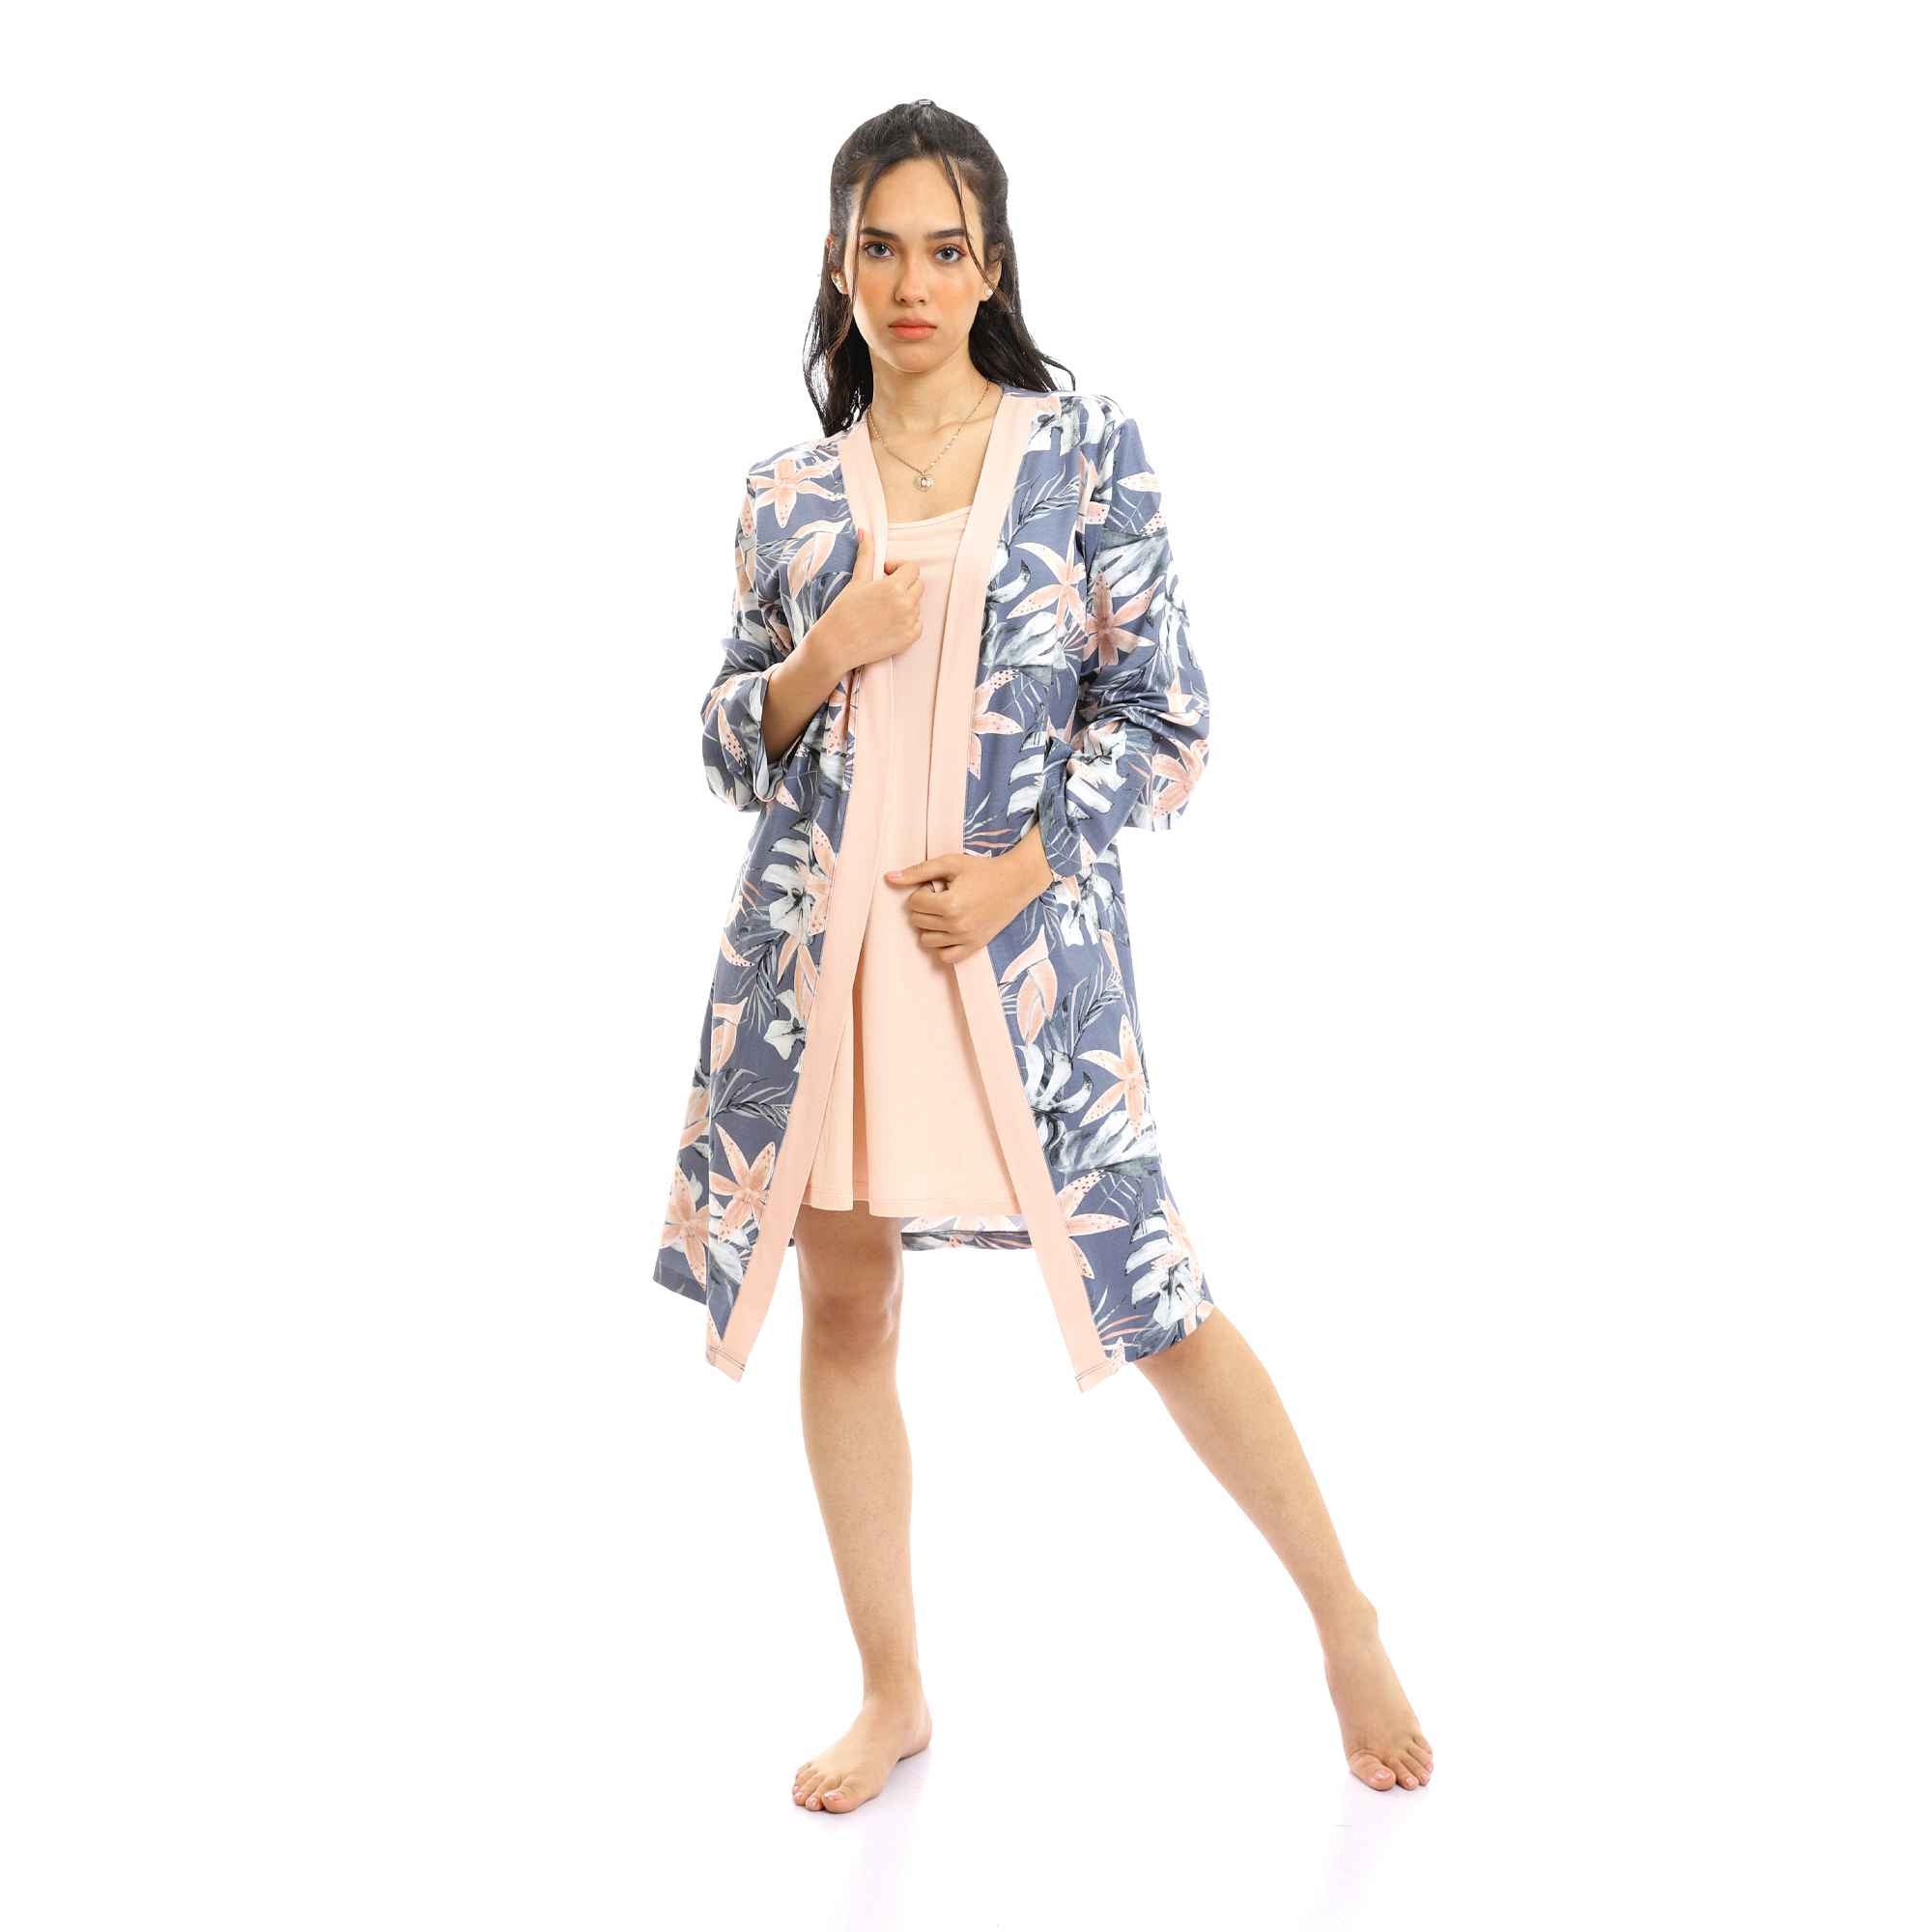 Simon Solid Short Nightgown & Colorful Floral Robe Set